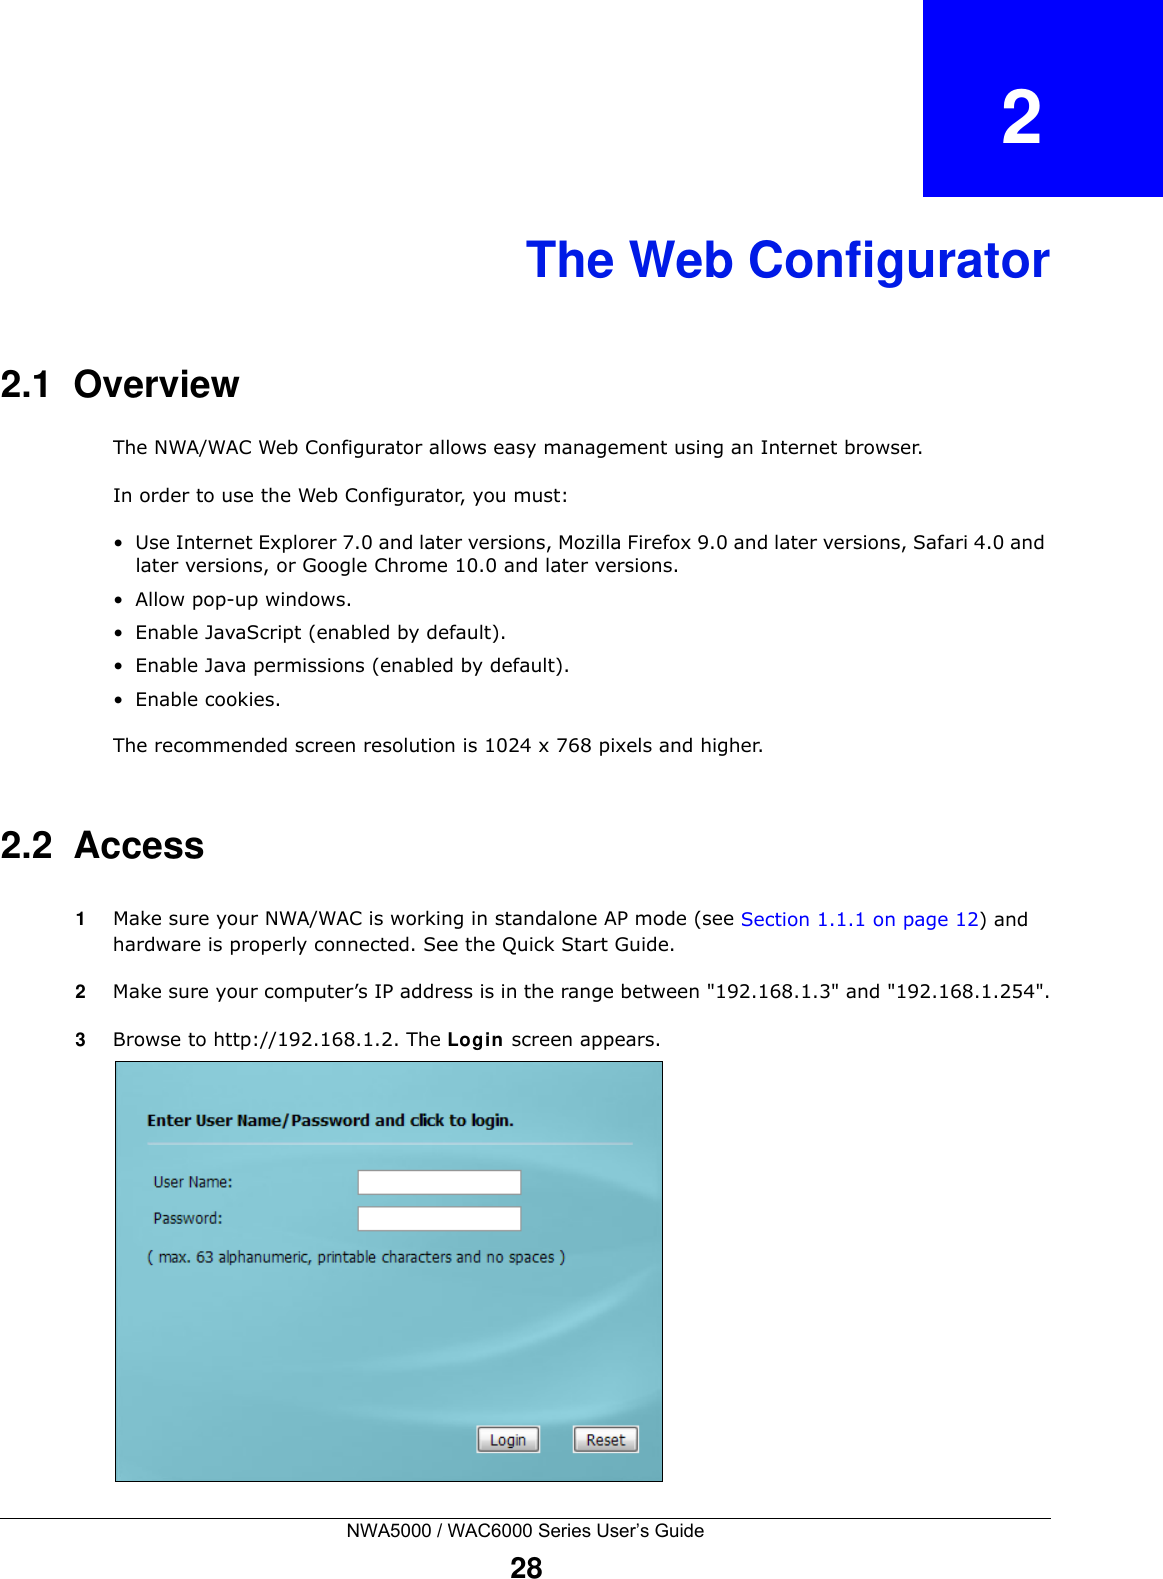 NWA5000 / WAC6000 Series User’s Guide28CHAPTER   2The Web Configurator2.1  OverviewThe NWA/WAC Web Configurator allows easy management using an Internet browser. In order to use the Web Configurator, you must:• Use Internet Explorer 7.0 and later versions, Mozilla Firefox 9.0 and later versions, Safari 4.0 and later versions, or Google Chrome 10.0 and later versions.• Allow pop-up windows.• Enable JavaScript (enabled by default).• Enable Java permissions (enabled by default).• Enable cookies.The recommended screen resolution is 1024 x 768 pixels and higher.2.2  Access1Make sure your NWA/WAC is working in standalone AP mode (see Section 1.1.1 on page 12) and hardware is properly connected. See the Quick Start Guide.2Make sure your computer’s IP address is in the range between &quot;192.168.1.3&quot; and &quot;192.168.1.254&quot;.3Browse to http://192.168.1.2. The Login screen appears. 